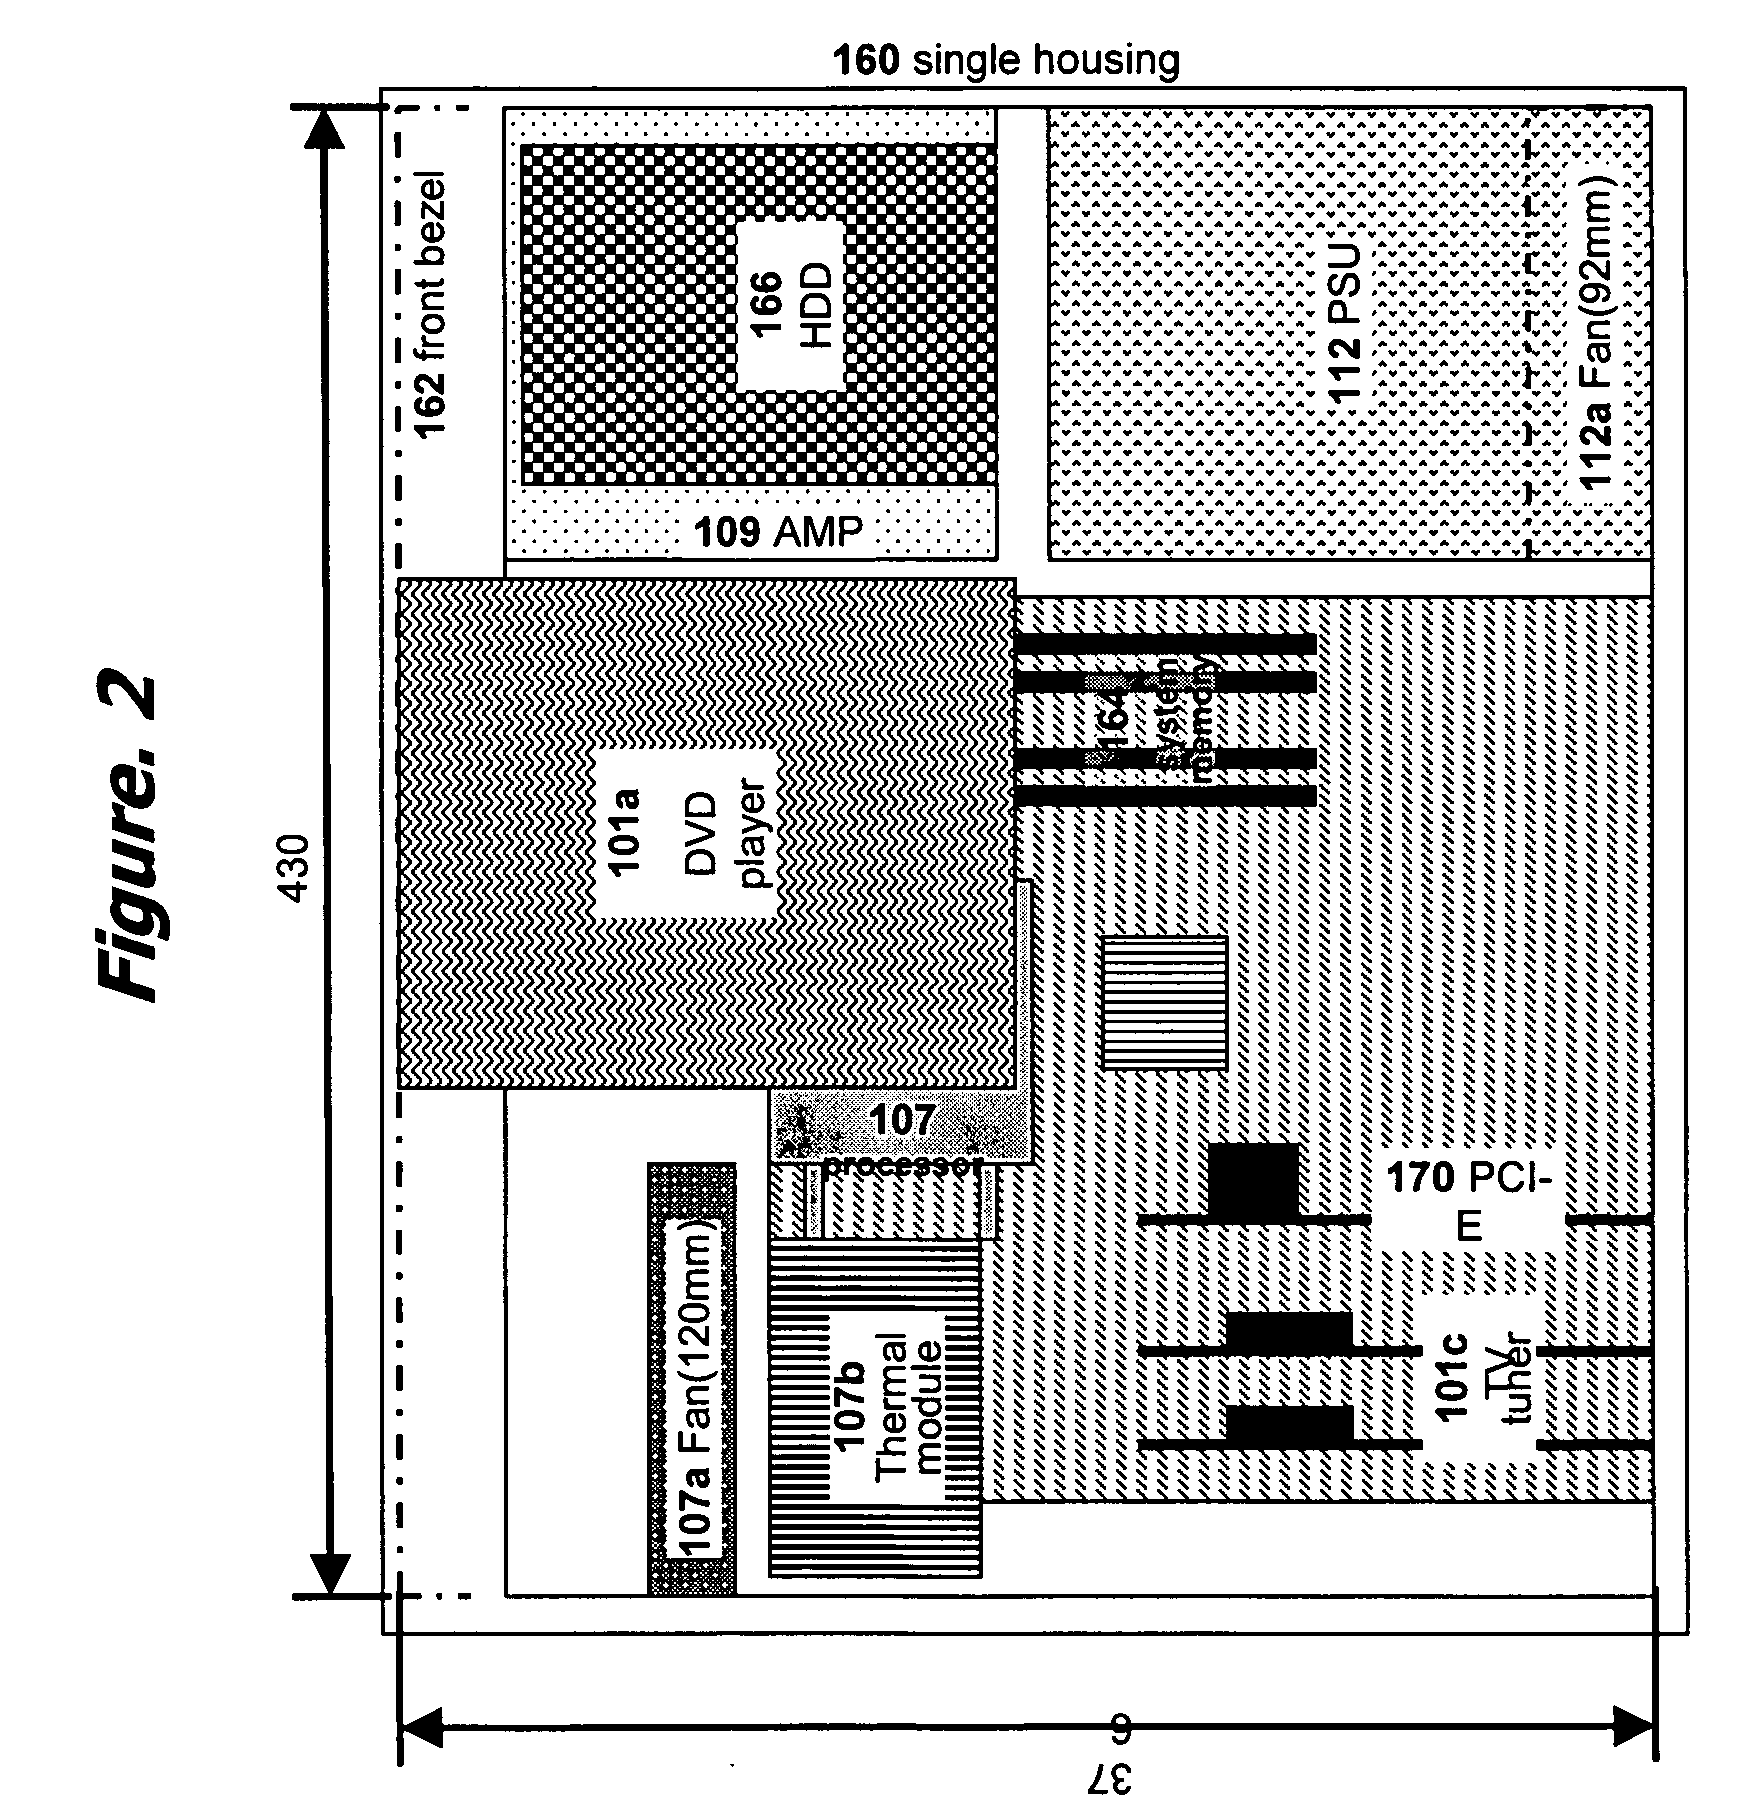 Integrated multimedia signal processing system using centralized processing of signals